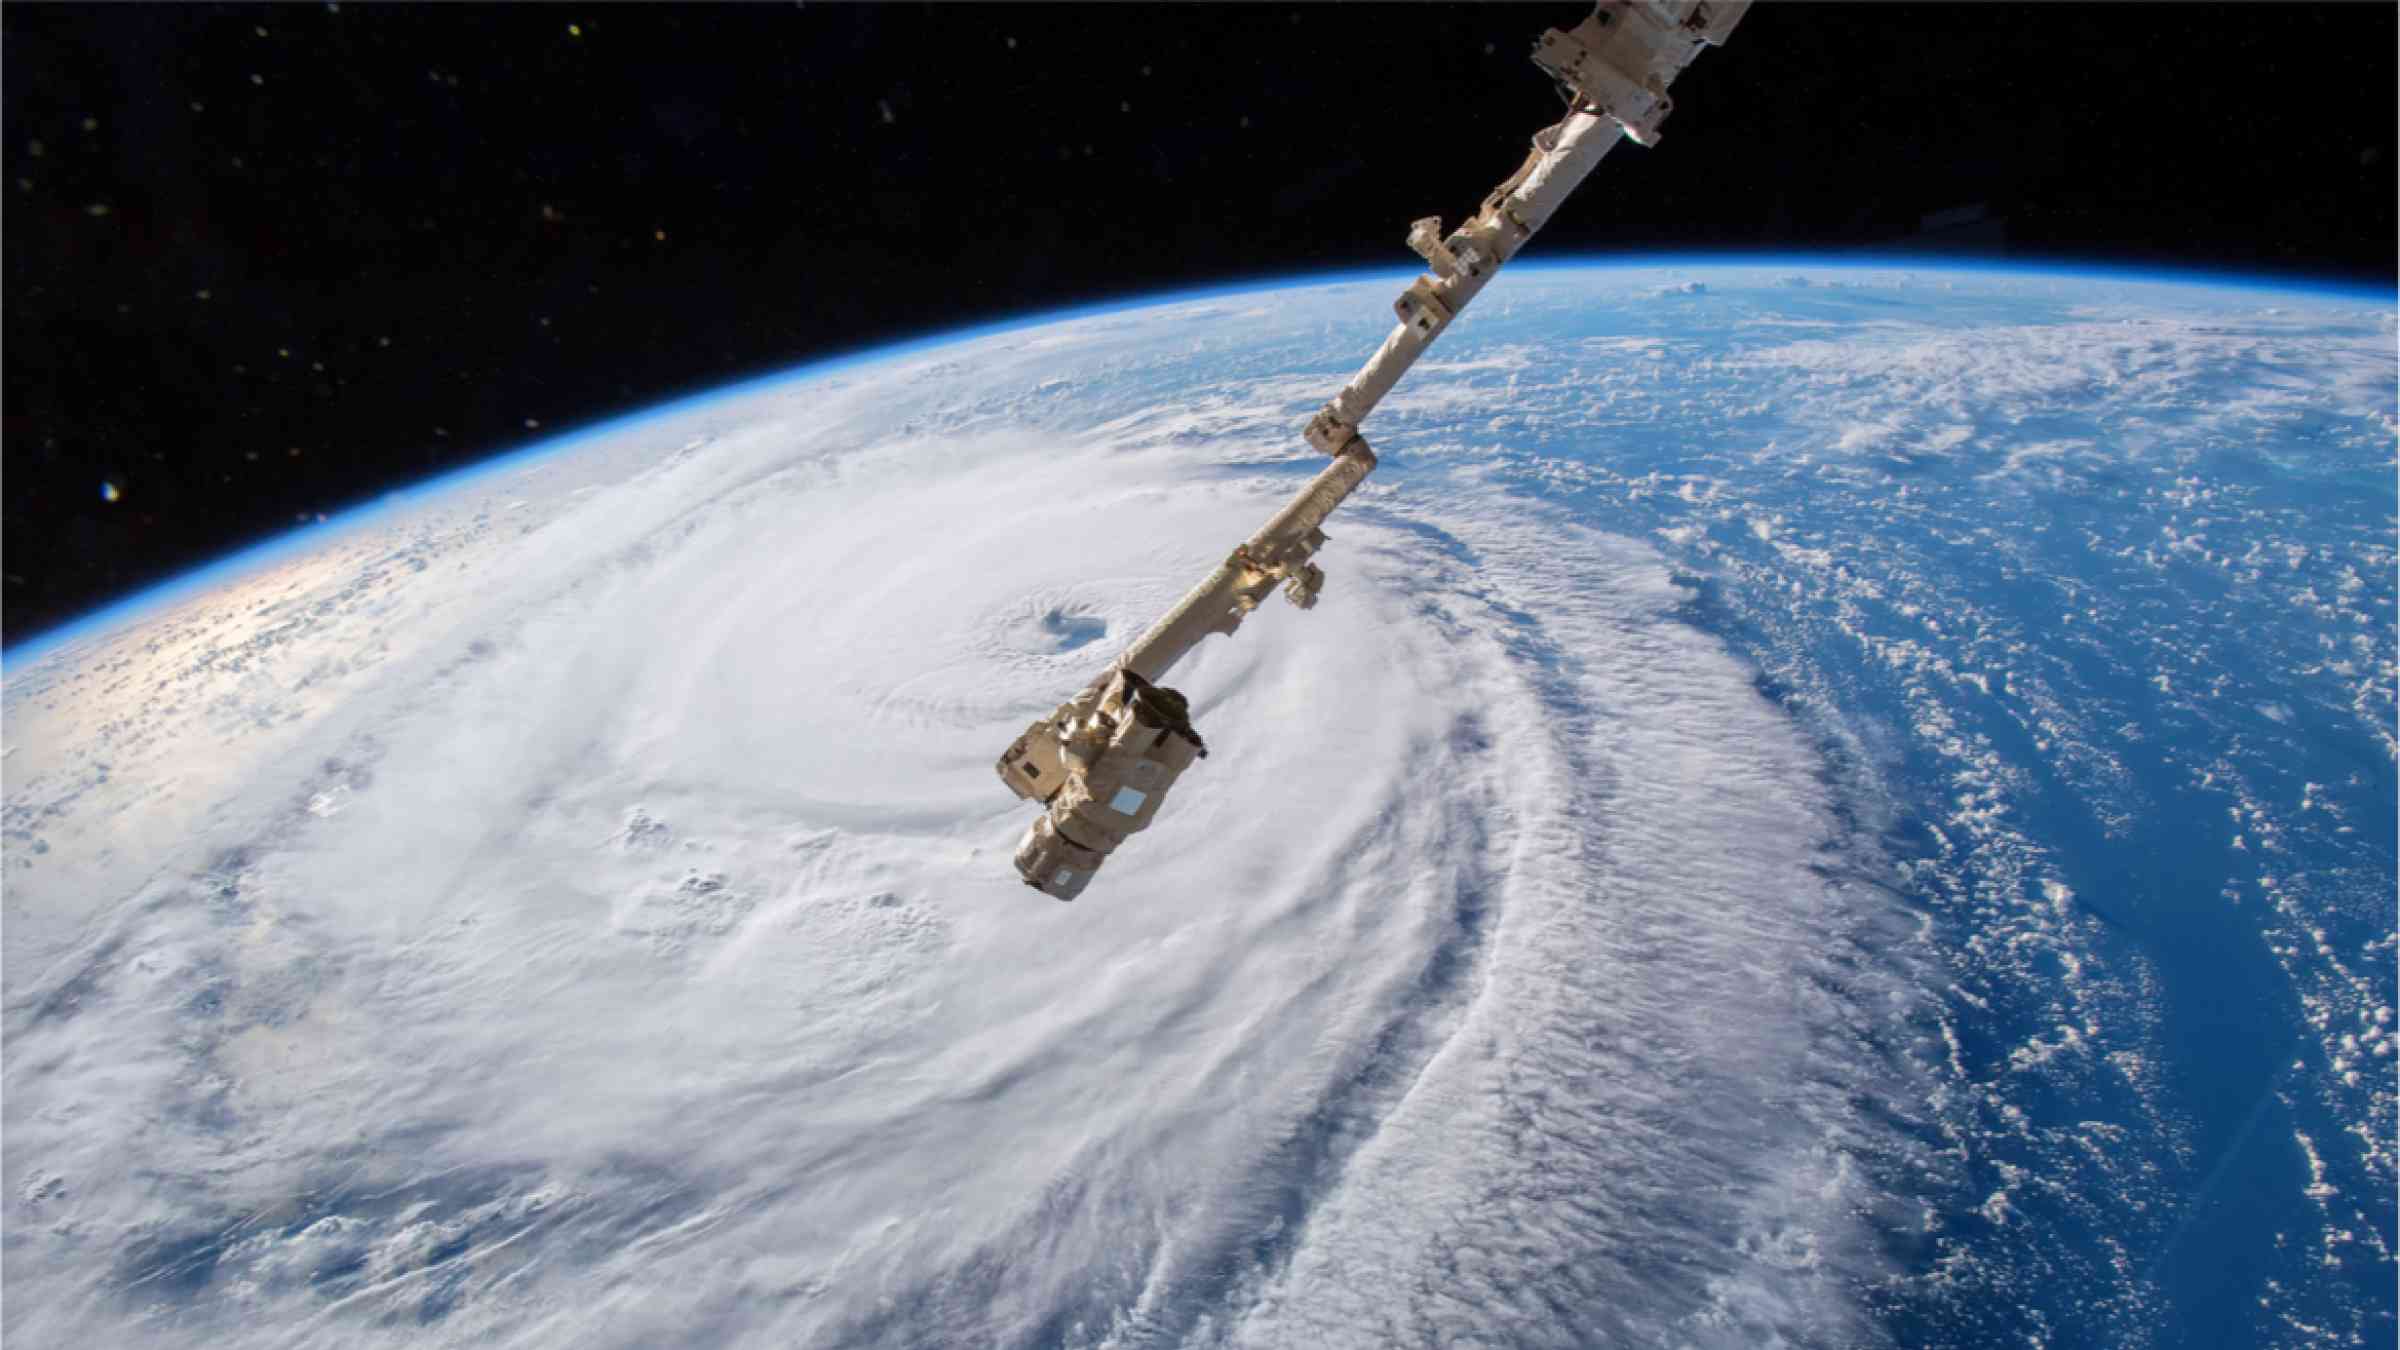 Hurricane Florence as photographed from space